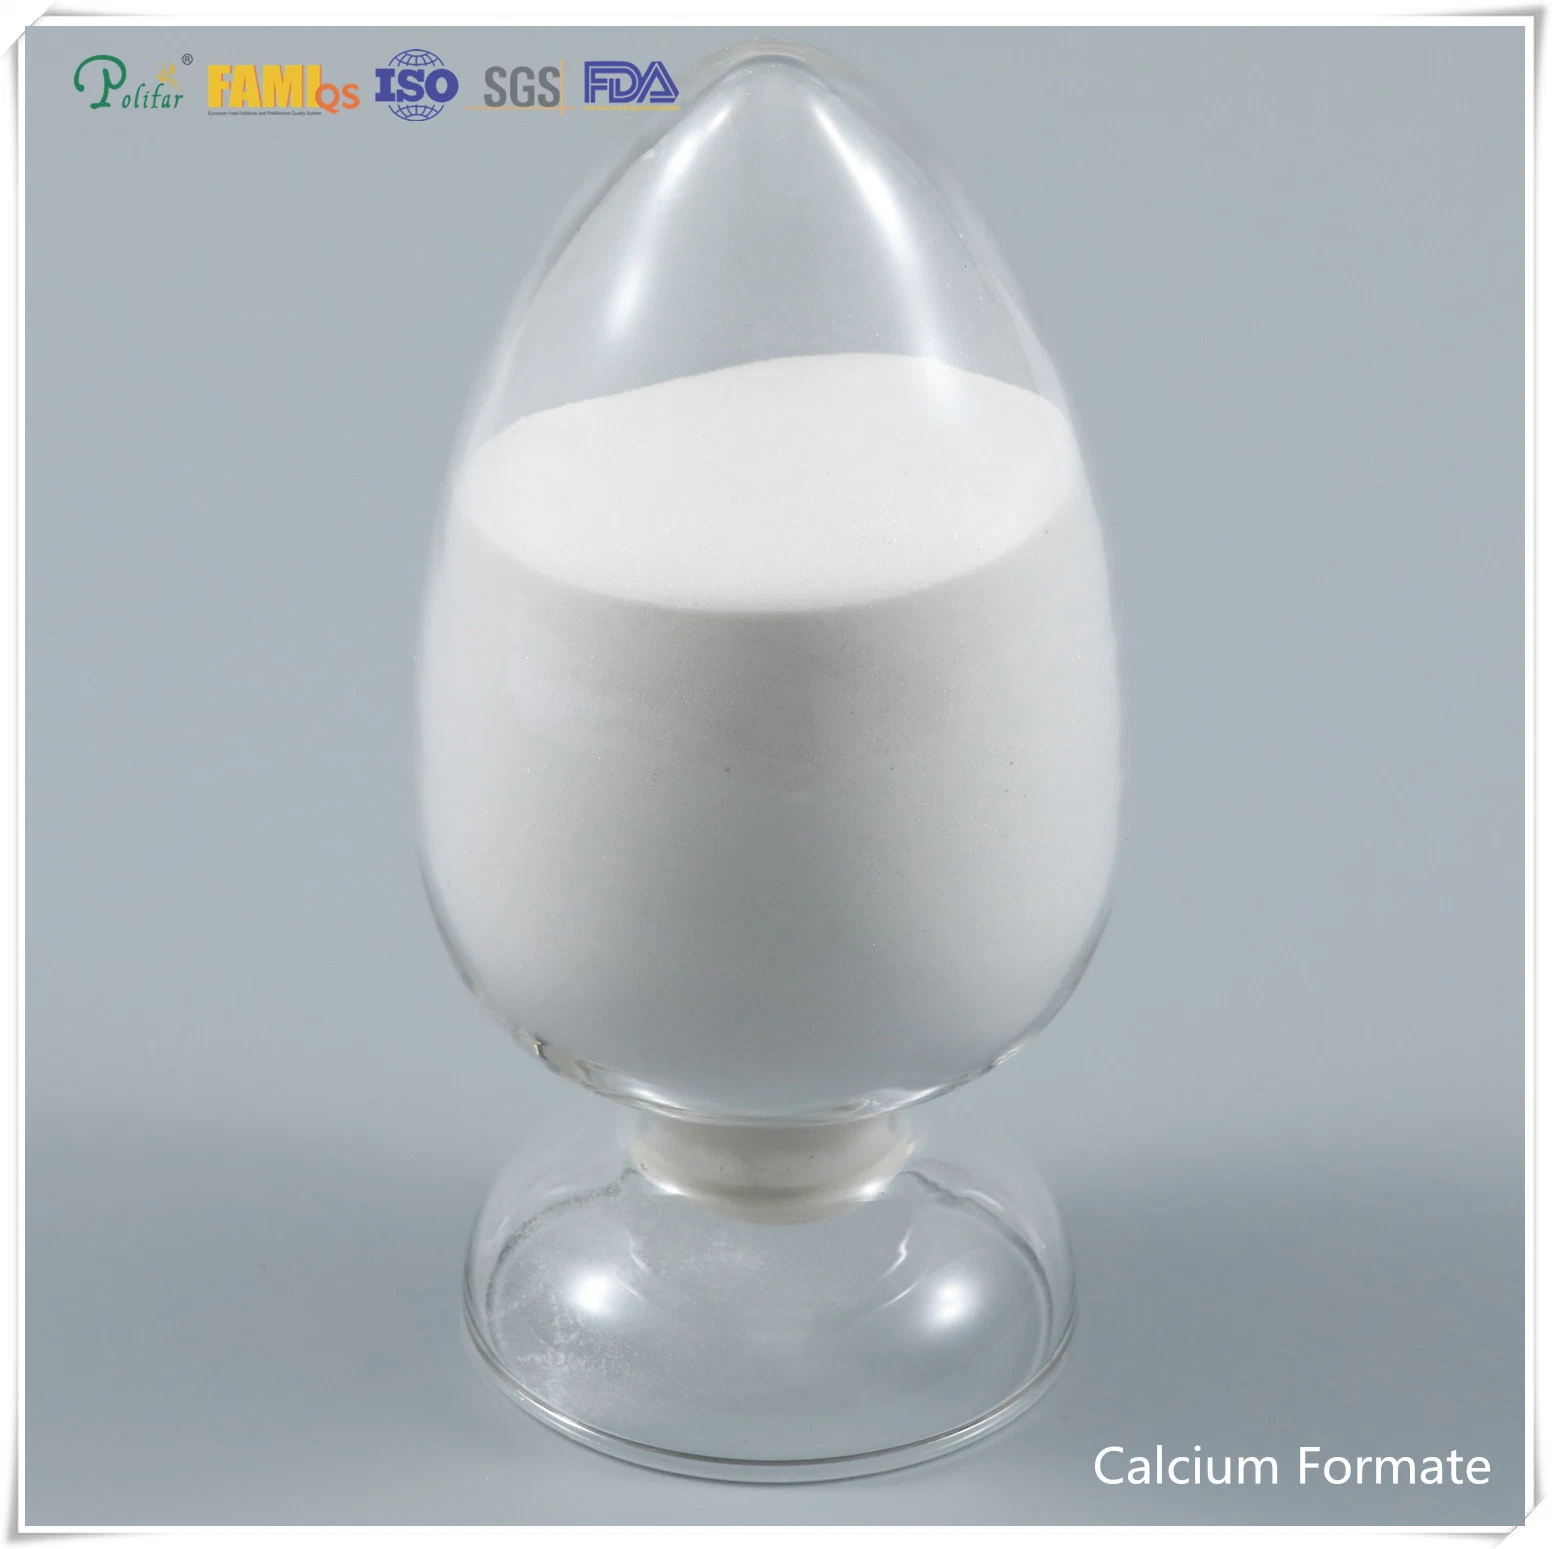 Polifar Factory Price Poultry Feed Additives Animals Nutrition Calcium Formate